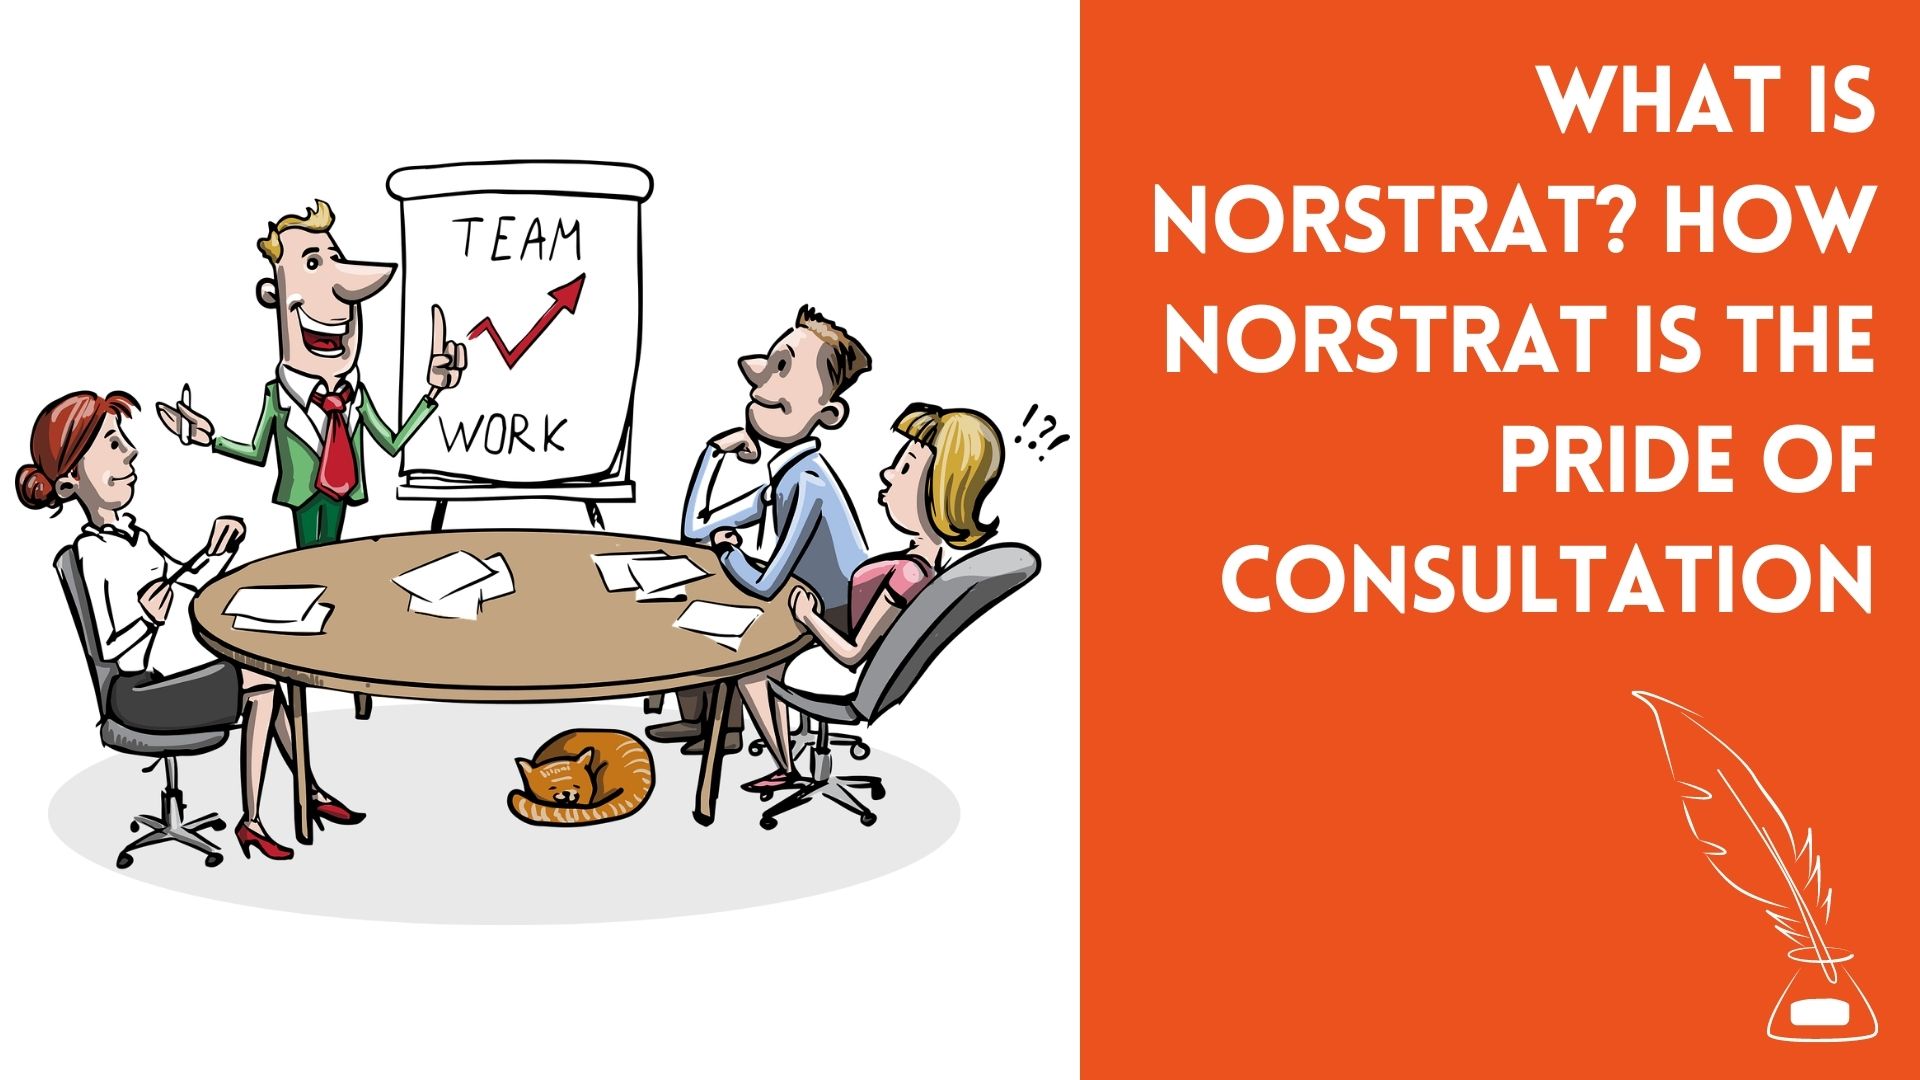 What is Norstrat? How Norstrat is the Pride of Consultation